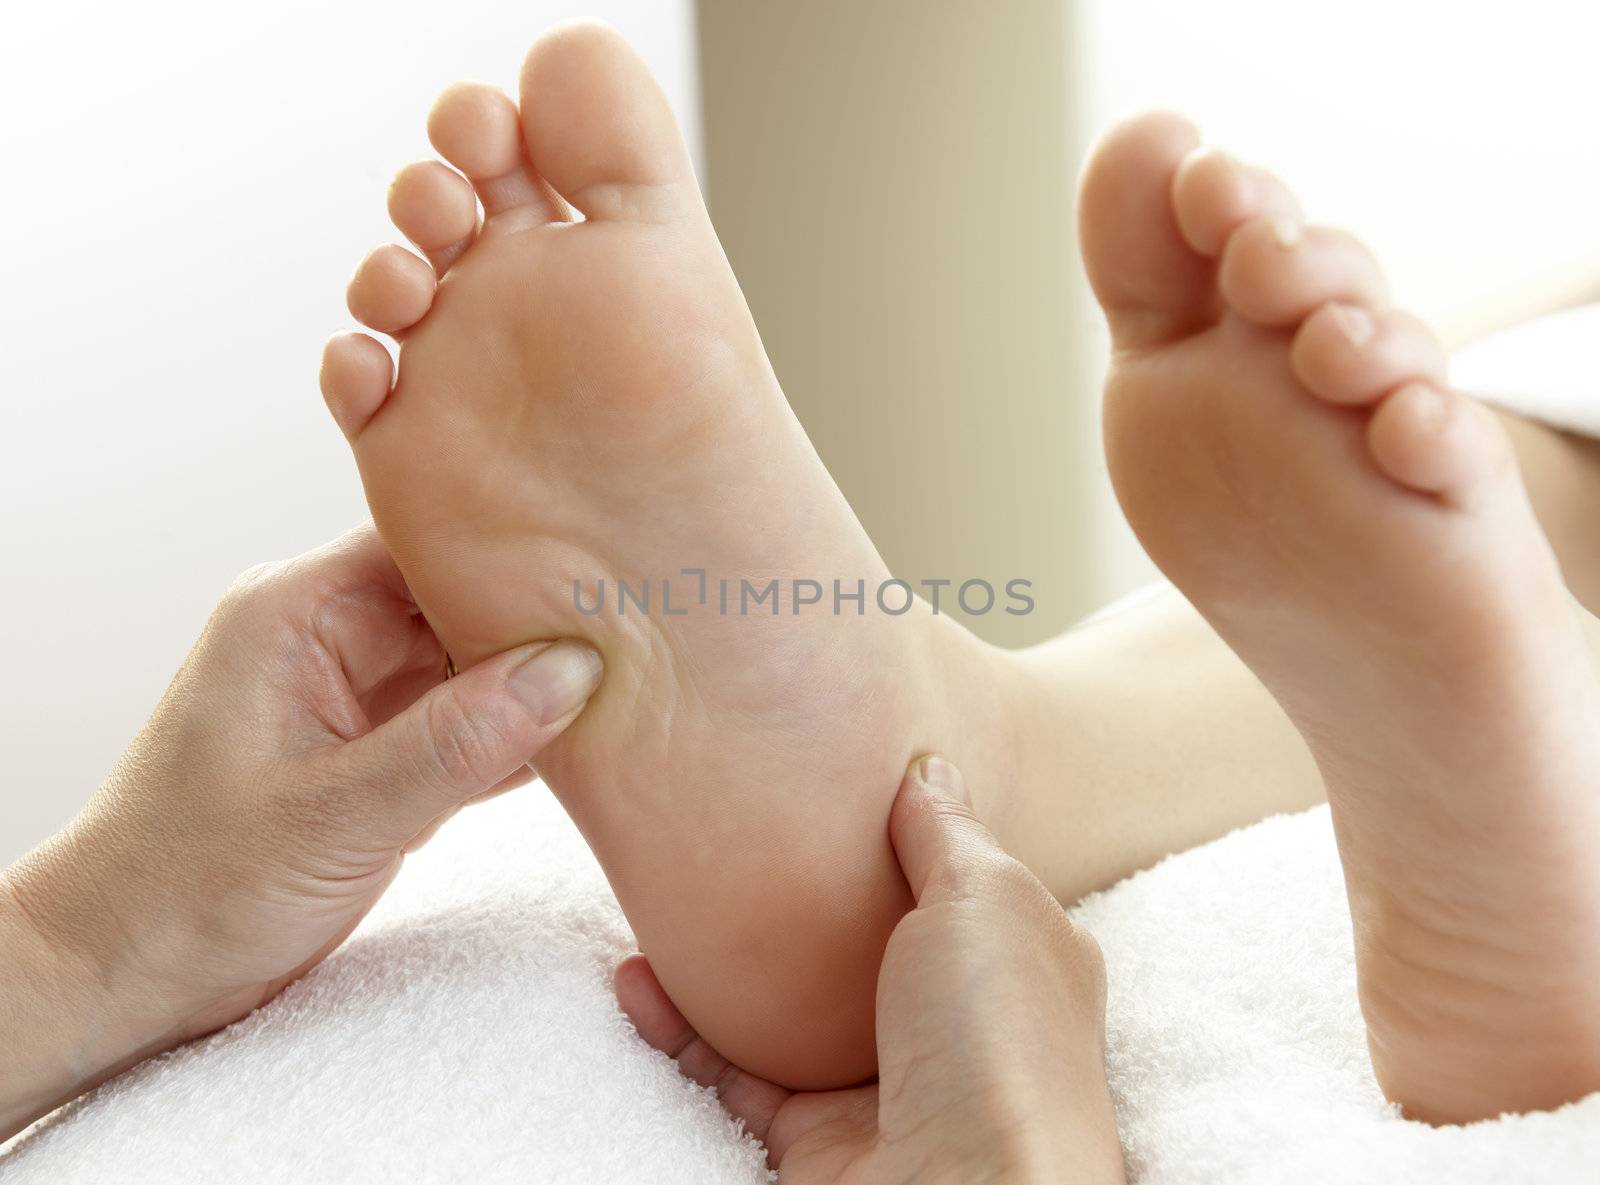 pair of feet being massaged by hands on white towel